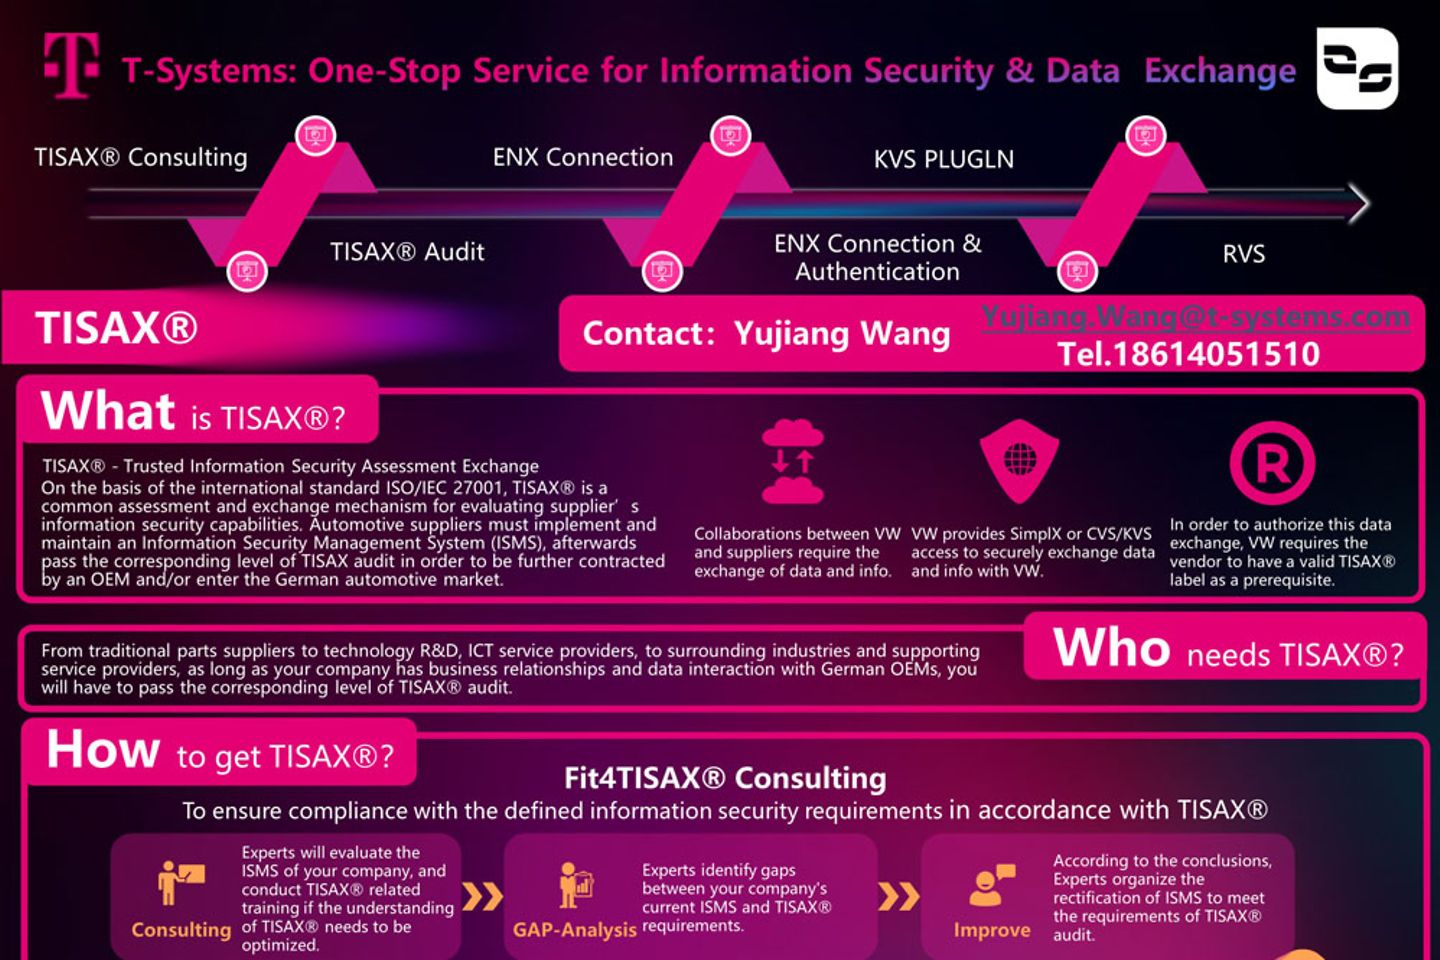 Flyer showing the TISAX service by T-Systems China